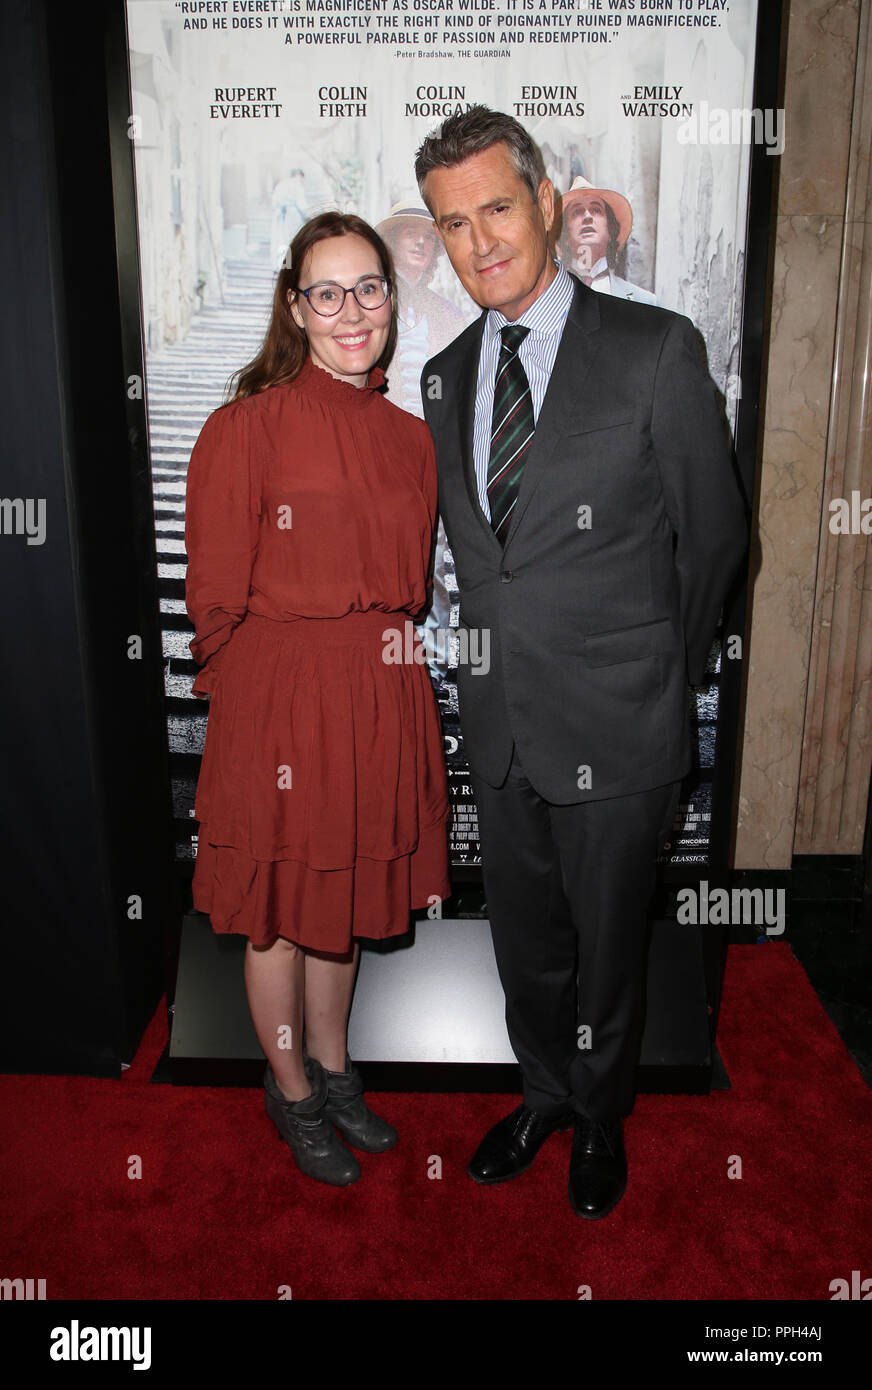 Beverly Hills, California, USA. 25th Sep, 2018. Jennifer Cochis, Rupert Everett, at 2018 LA Film Festival - Gala Screening Of 'The Happy Prince' at Wallis Annenberg Center for the Performing Arts in Beverly Hills California on September 25, 2018. Credit: Faye Sadou/Media Punch/Alamy Live News Stock Photo